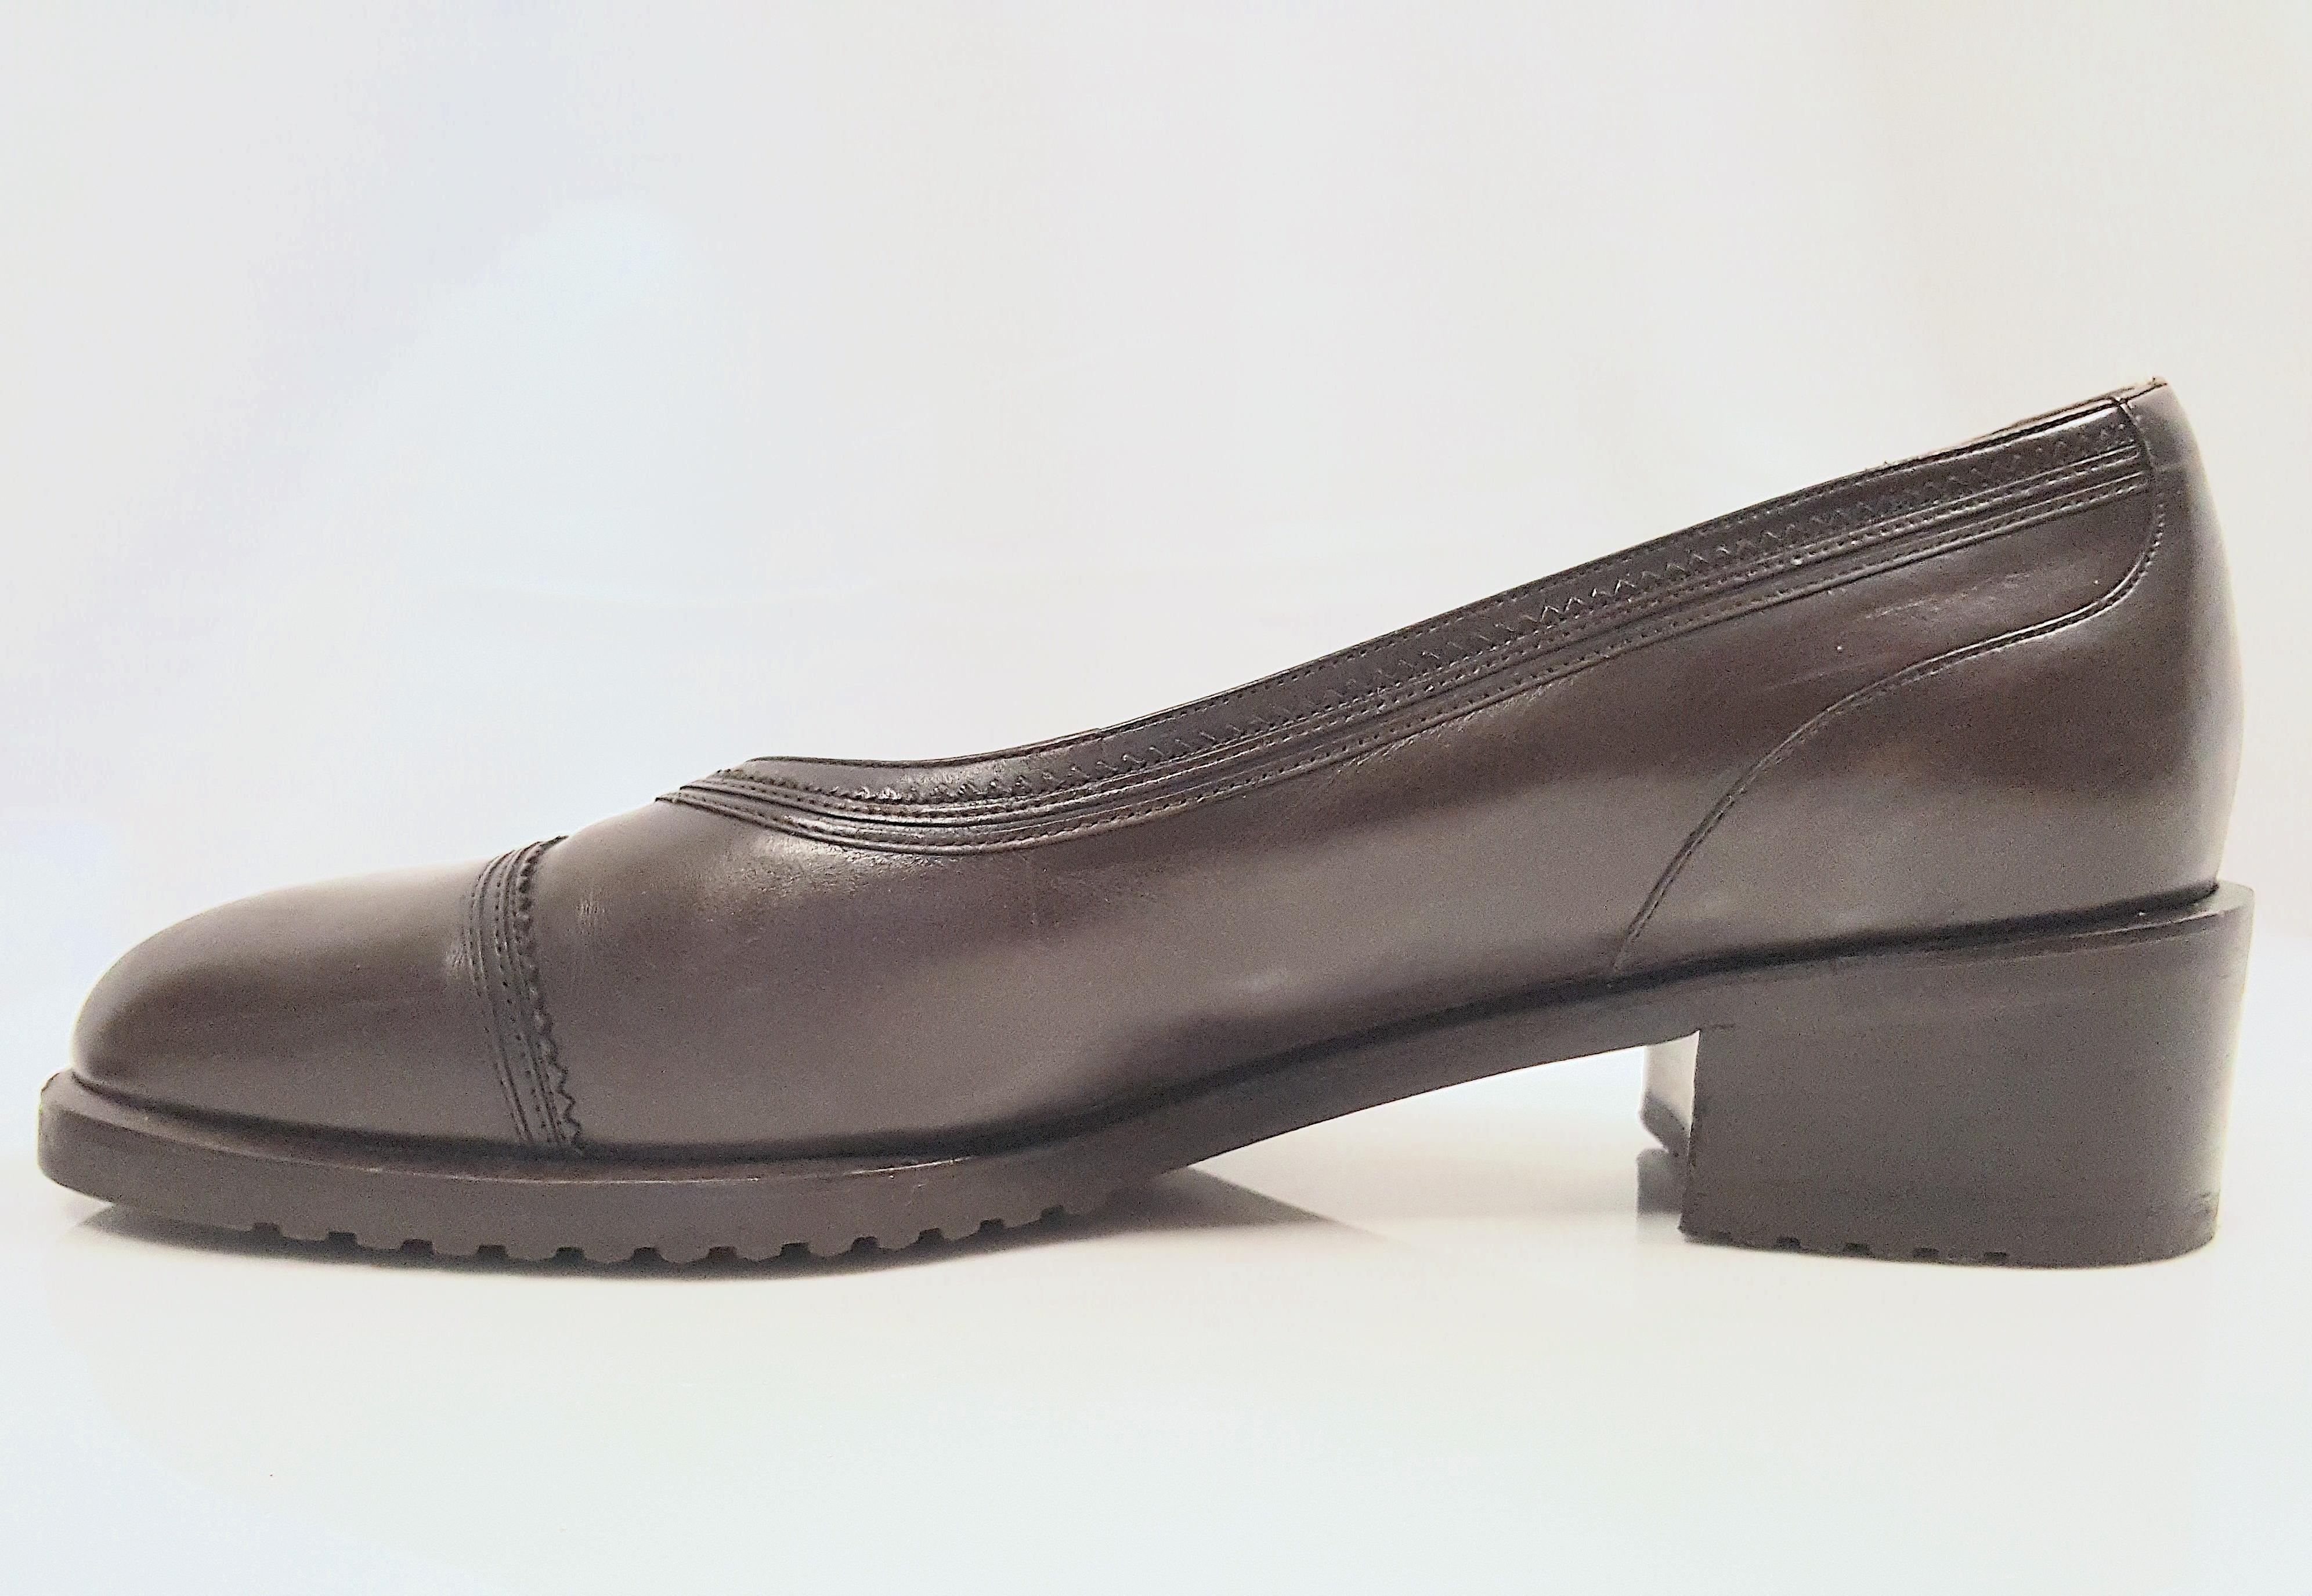 In excellent like-new condition since they were custom-made in the late 20th Century, these Bally luxurious shearling-lined leather Vasano-model shoes that are equivalent to a U.S.-size wide 7 1/2 are a dark brown classic Oxford-style slip-on